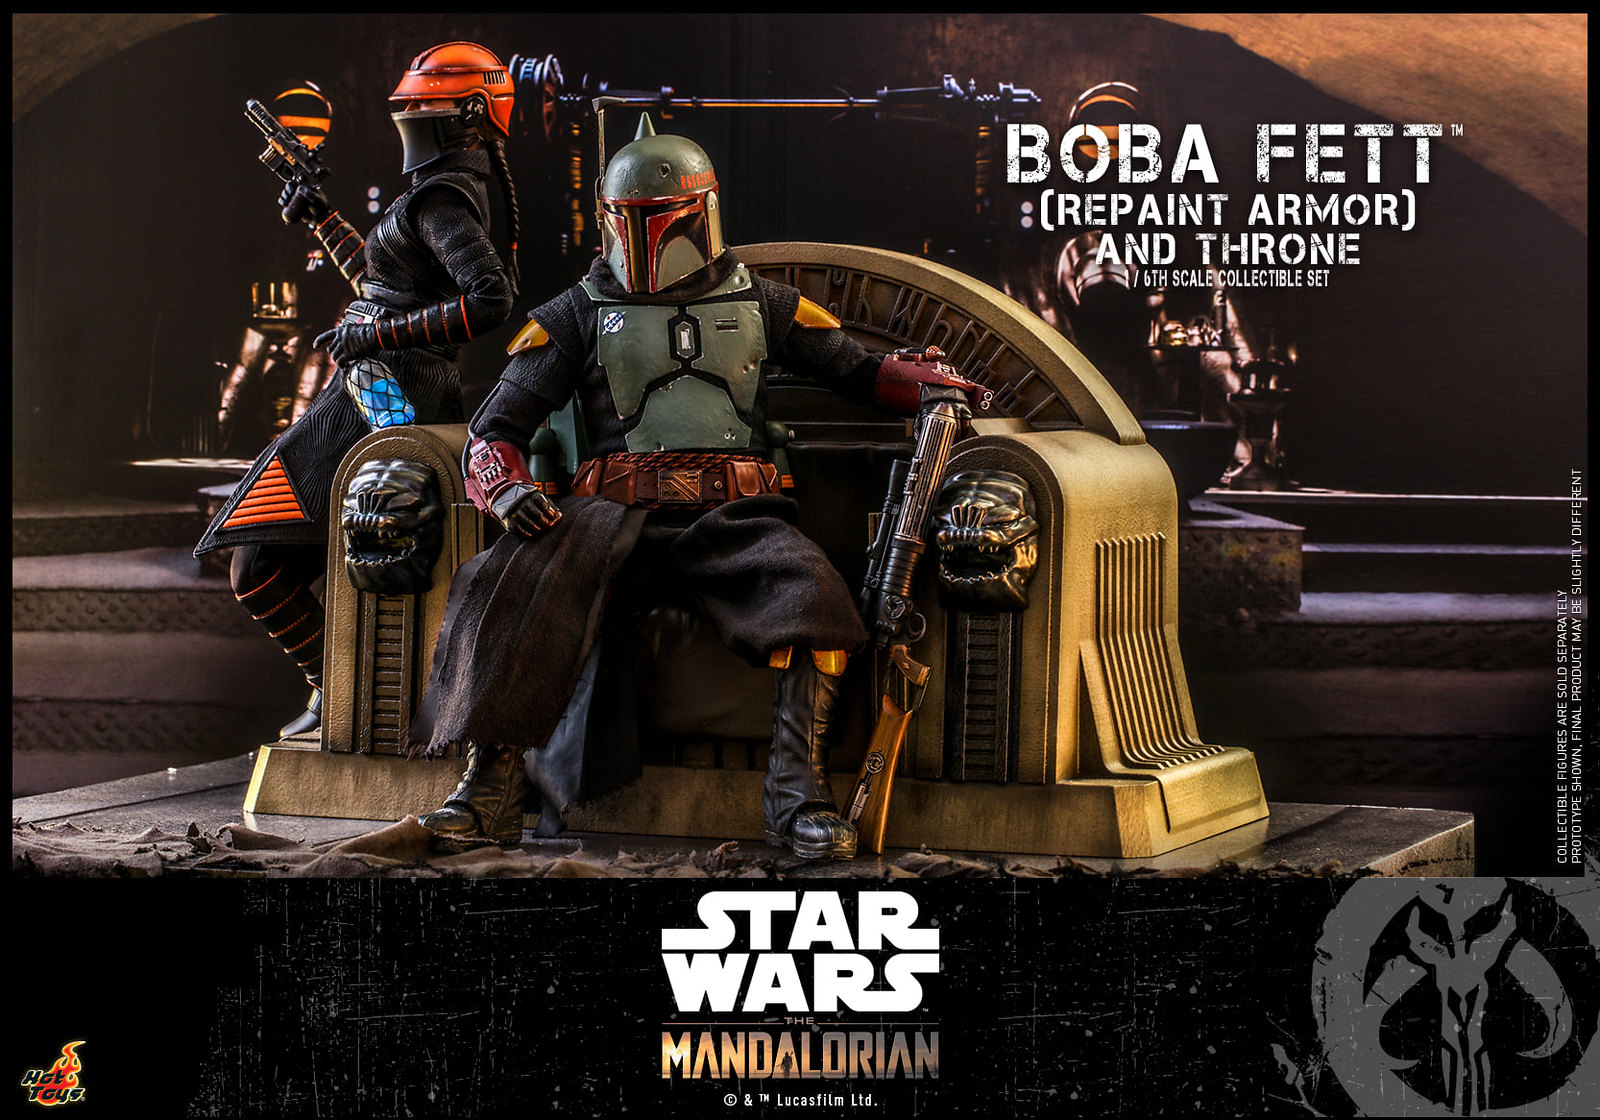 Star Wars: The Mandalorian™ - 1/6th scale Boba Fett™ (Repaint Armor) Collectible figure/ figure and Throne Collectible Set 51310549392_56263186e1_h